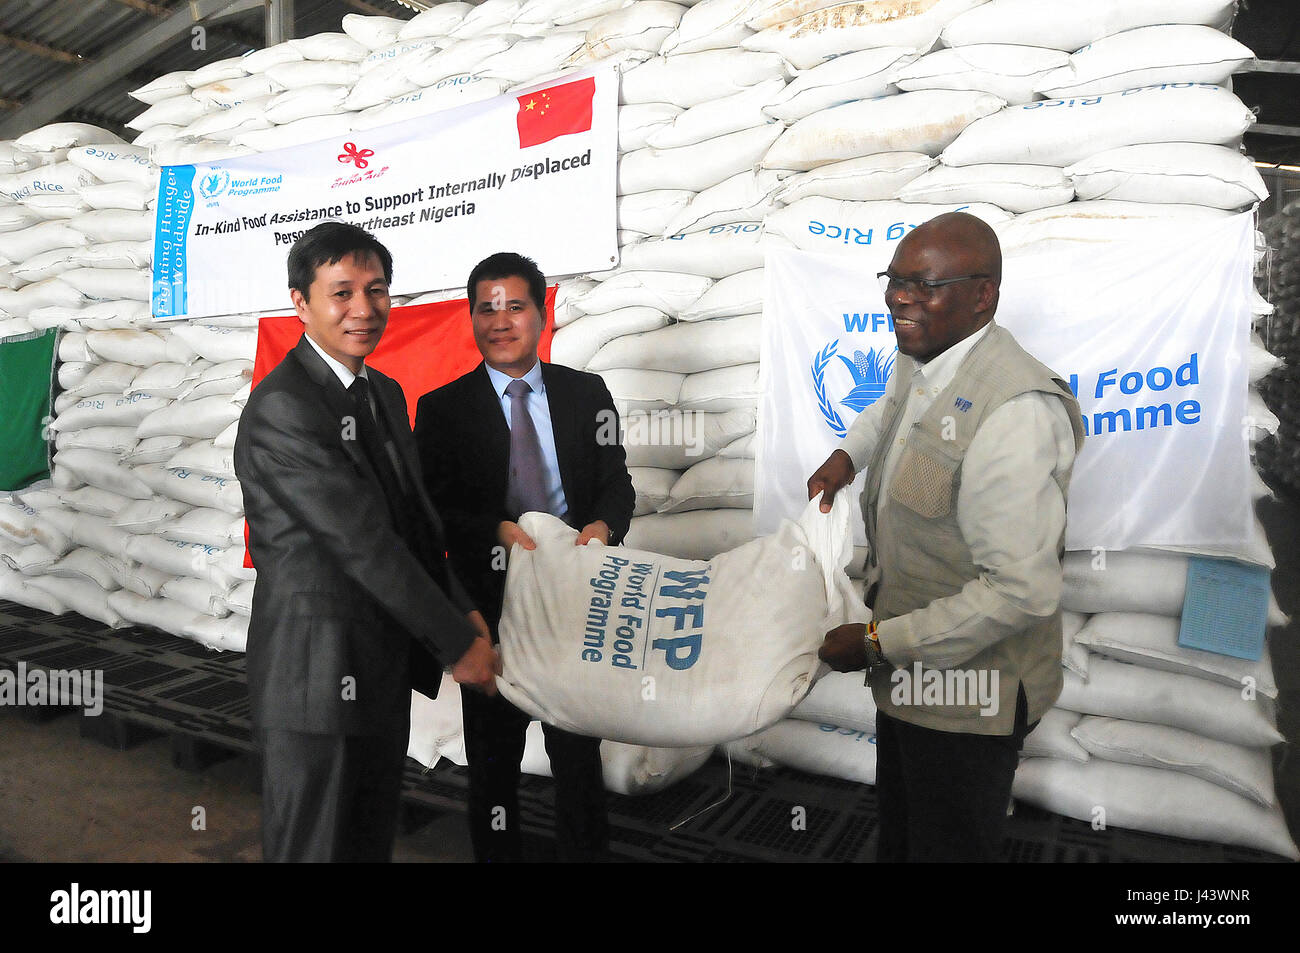 Maiduguri, Nigeria. 8th May, 2017. Chinese ambassador to Nigeria Zhou Pingjian (C) and Ron Sibanda (R), country director and representative of the United Nations World Food Program (WFP) attend a hand-over ceremony at the warehouse of WFP near Maiduguri, Nigeria, on May 8, 2017. China on Monday provided Nigeria with 5 million U.S. dollars in emergency humanitarian aid as part of its support for relief efforts by the United Nations World Food Program (WFP) in northeast Nigeria. Credit: Zhang Baoping/Xinhua/Alamy Live News Stock Photo